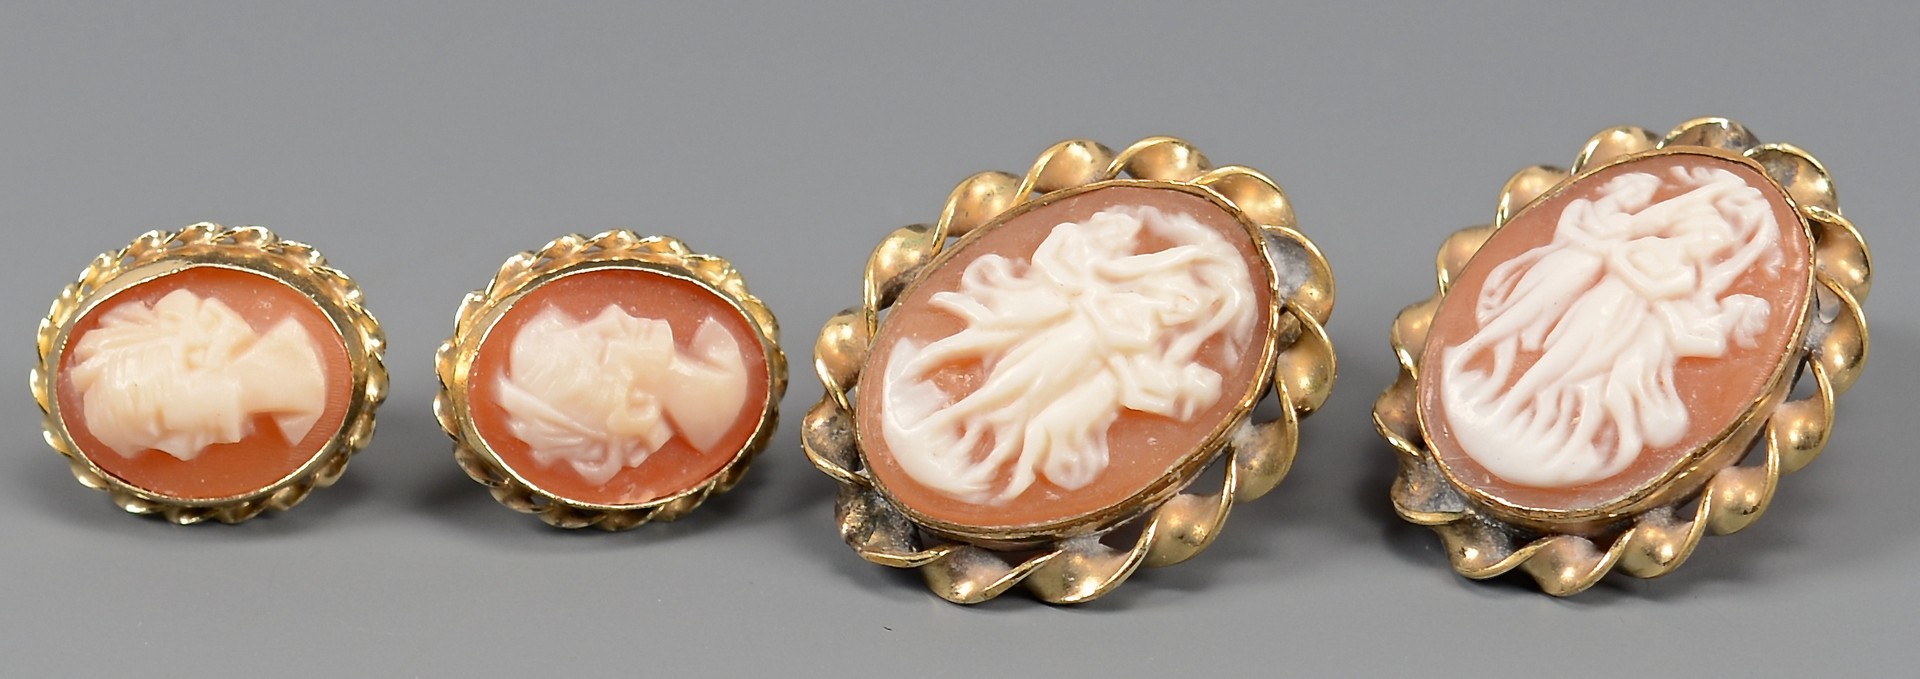 Lot 665: Grouping of Cameo Jewelry plus other